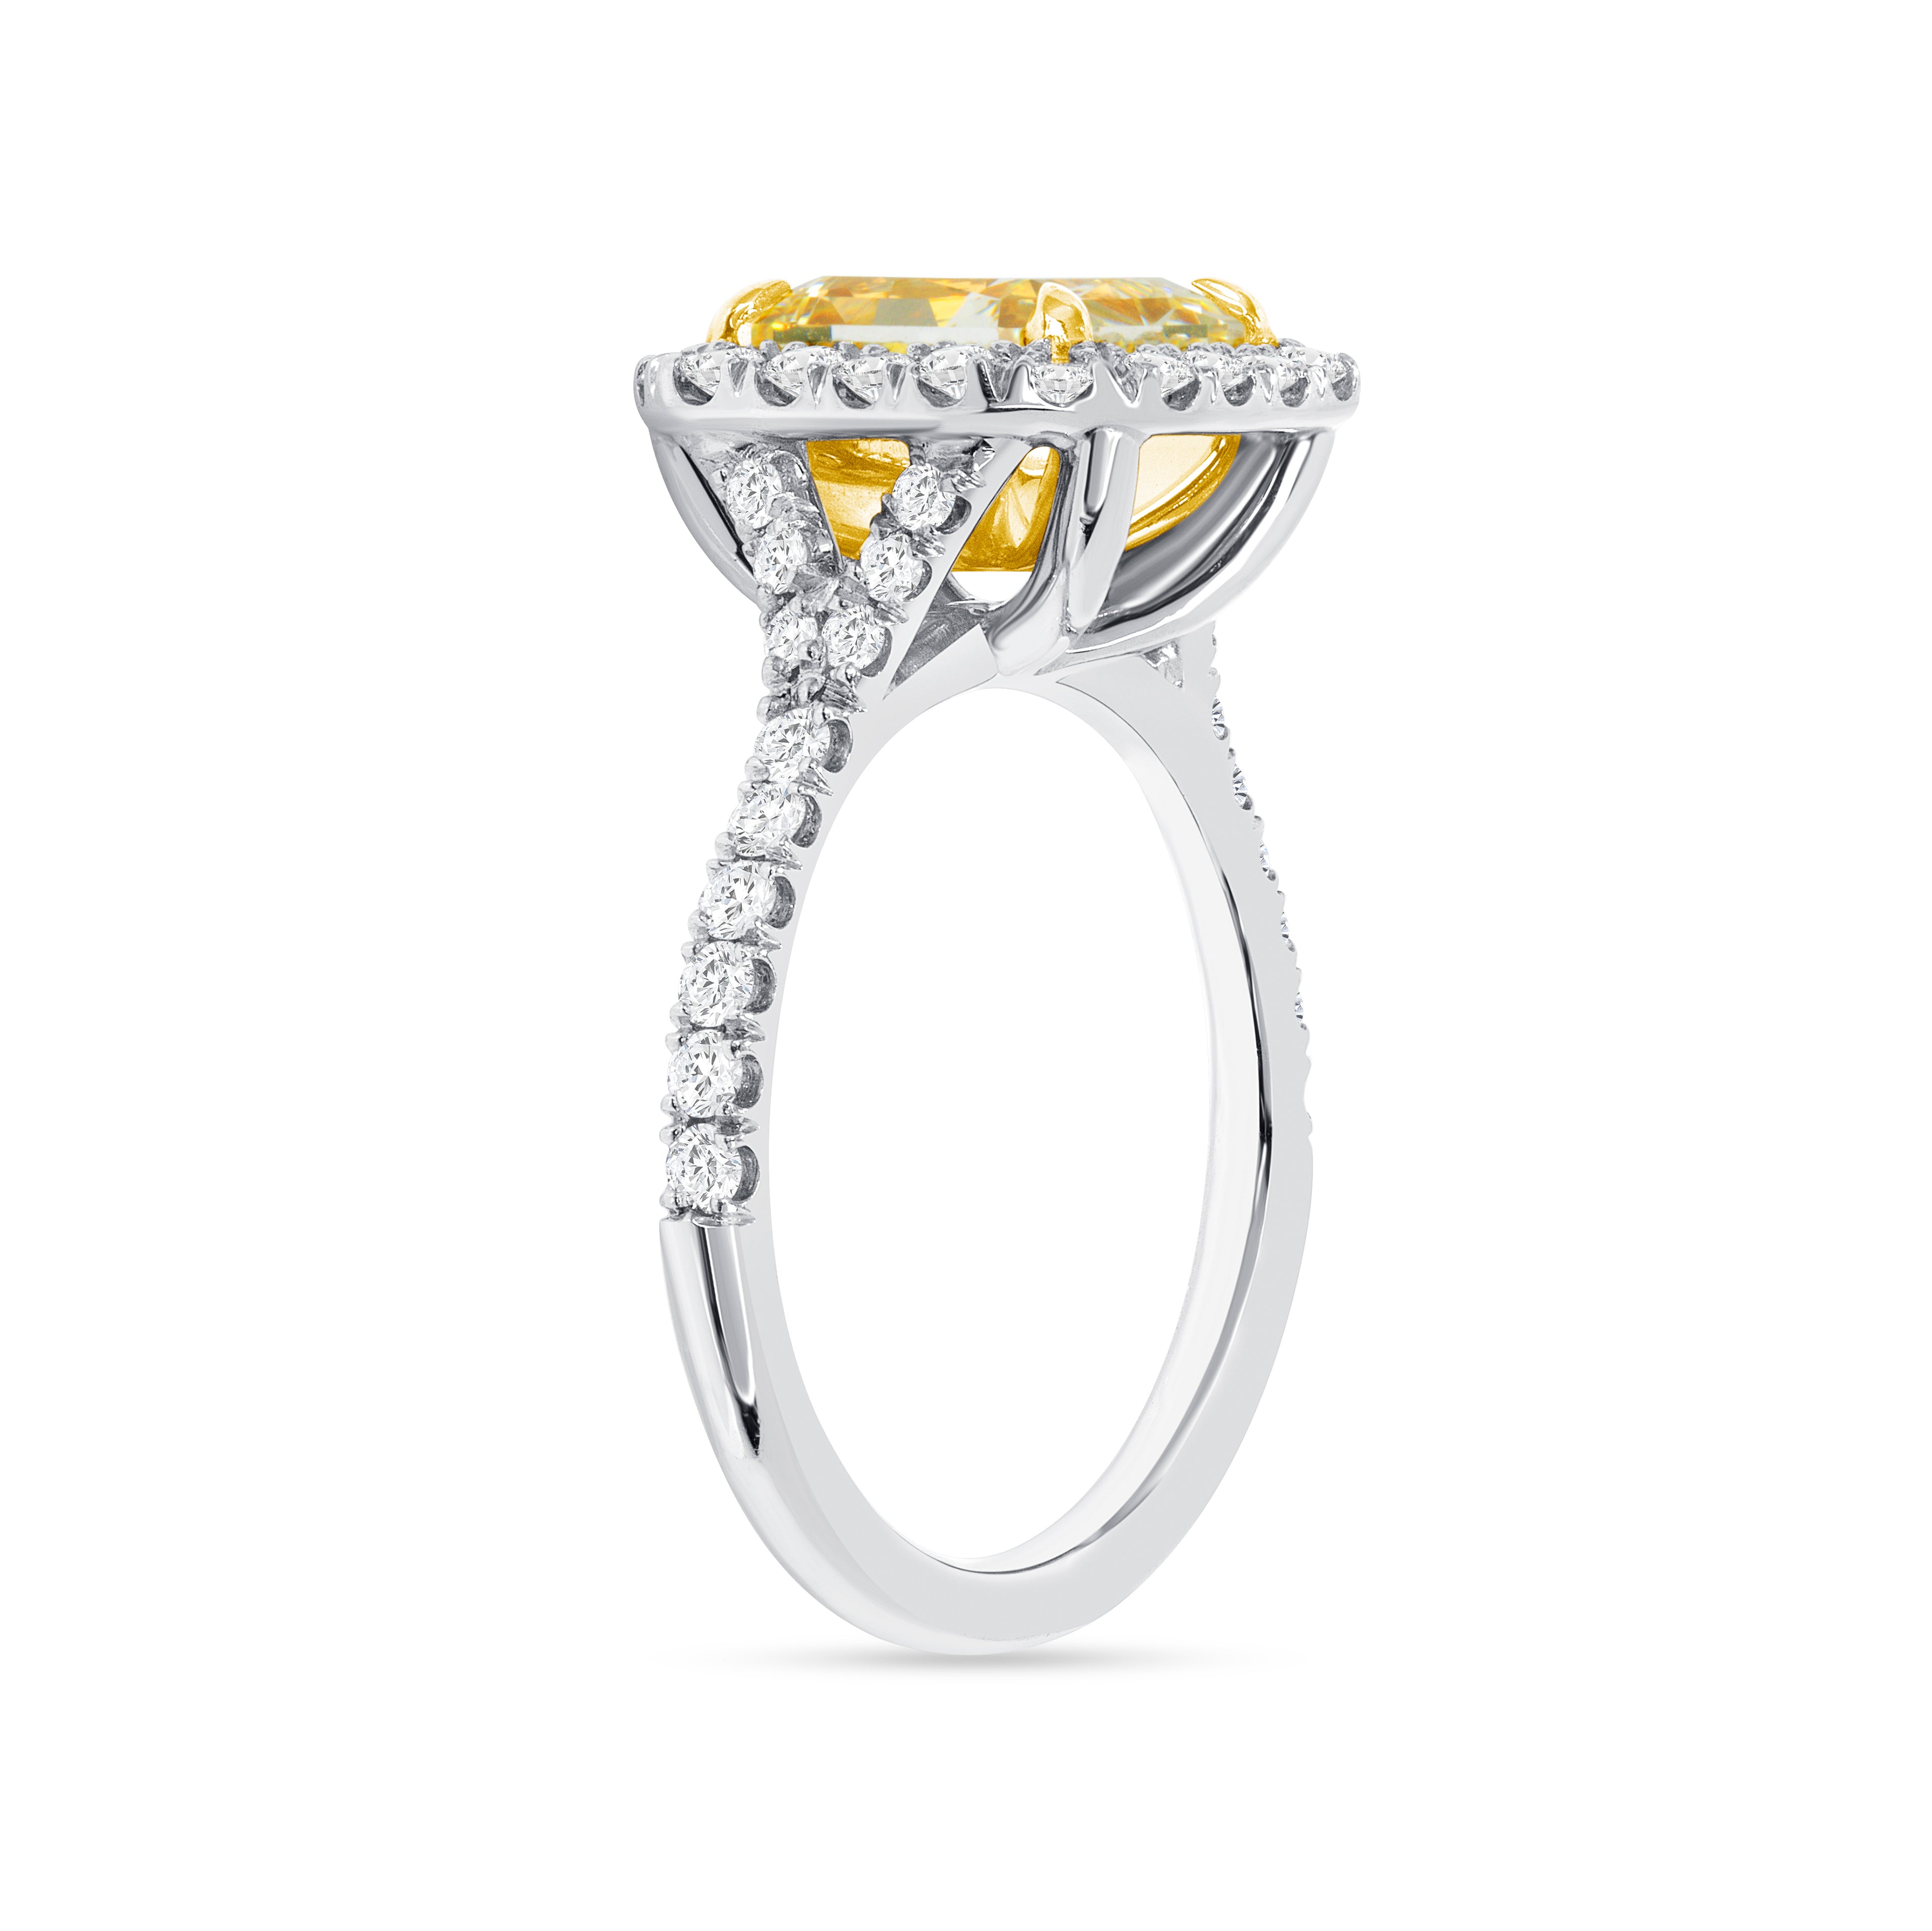 3.64 CT. Halo Radiant Cut YZ Yellow Diamond Ring in Platinum and 18K Yellow Gold